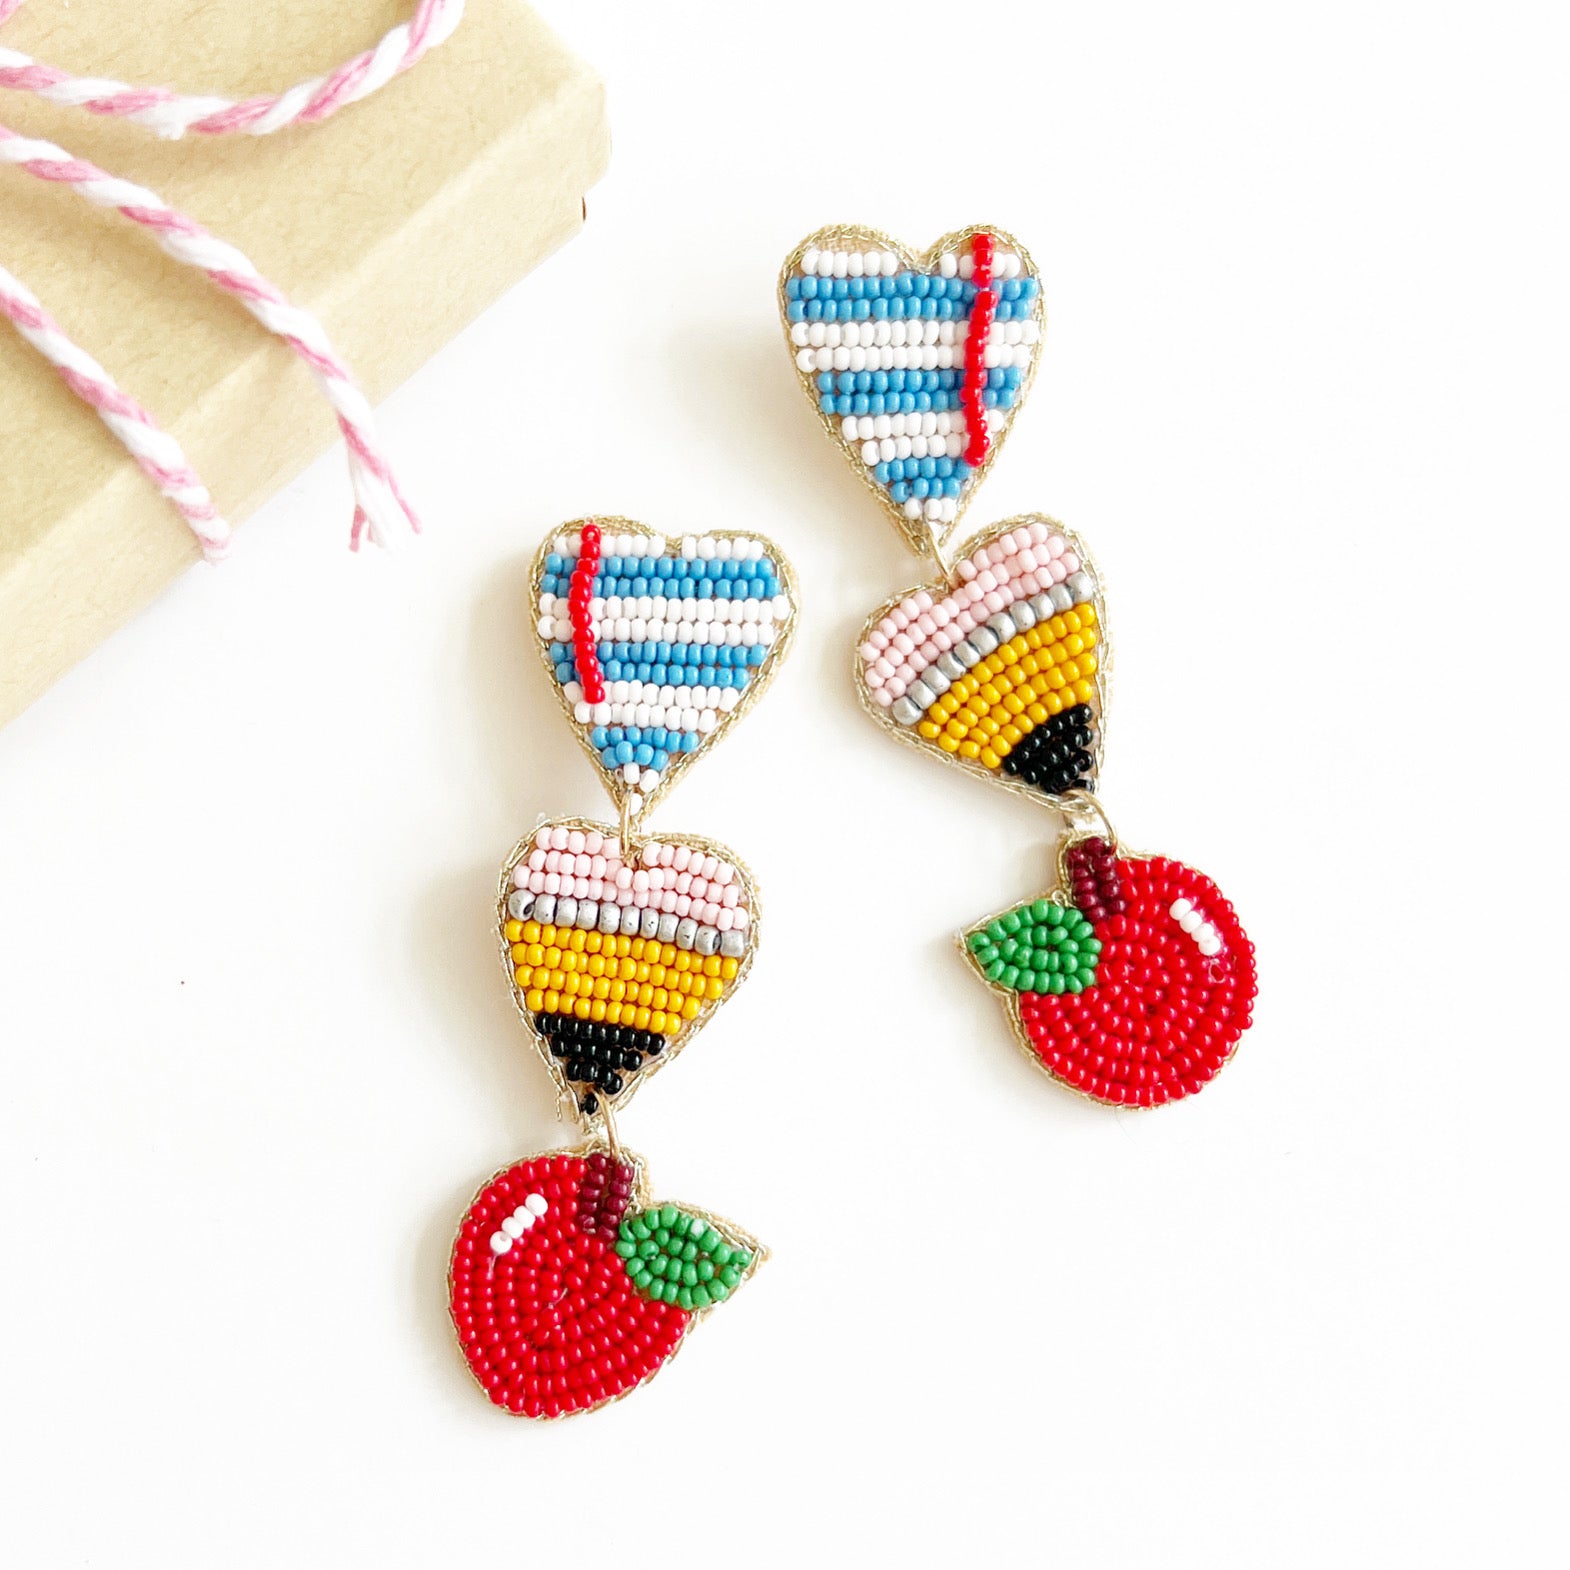 hand beaded school teacher earrings that feature  paper, pencil and apple